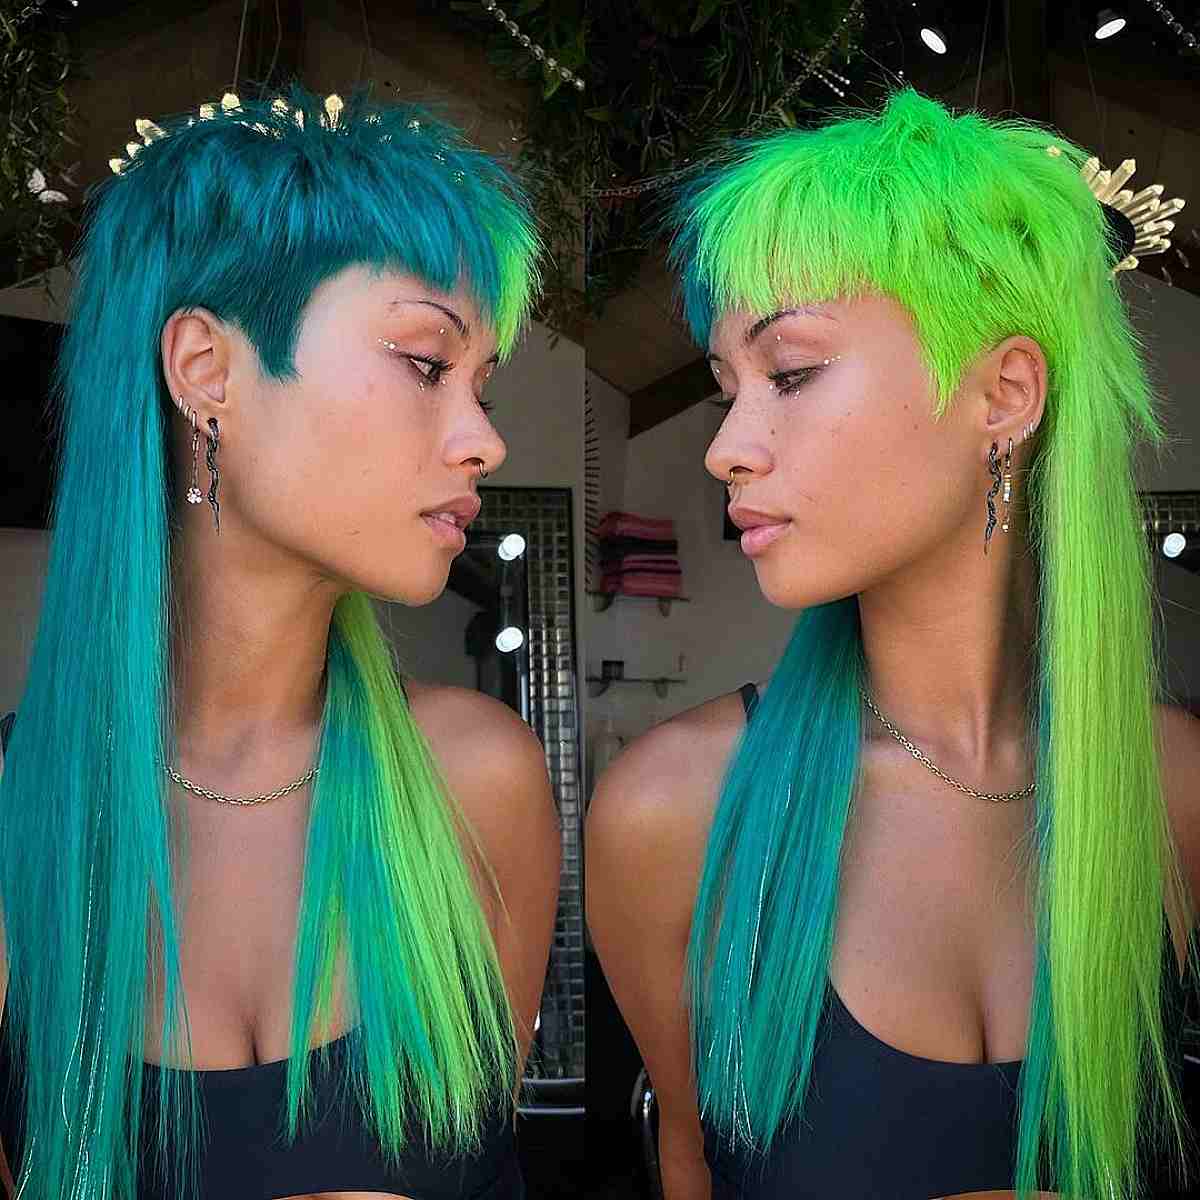 Light to Dark Green Hair Colors &#8211; 45 Ideas to See (Photos)